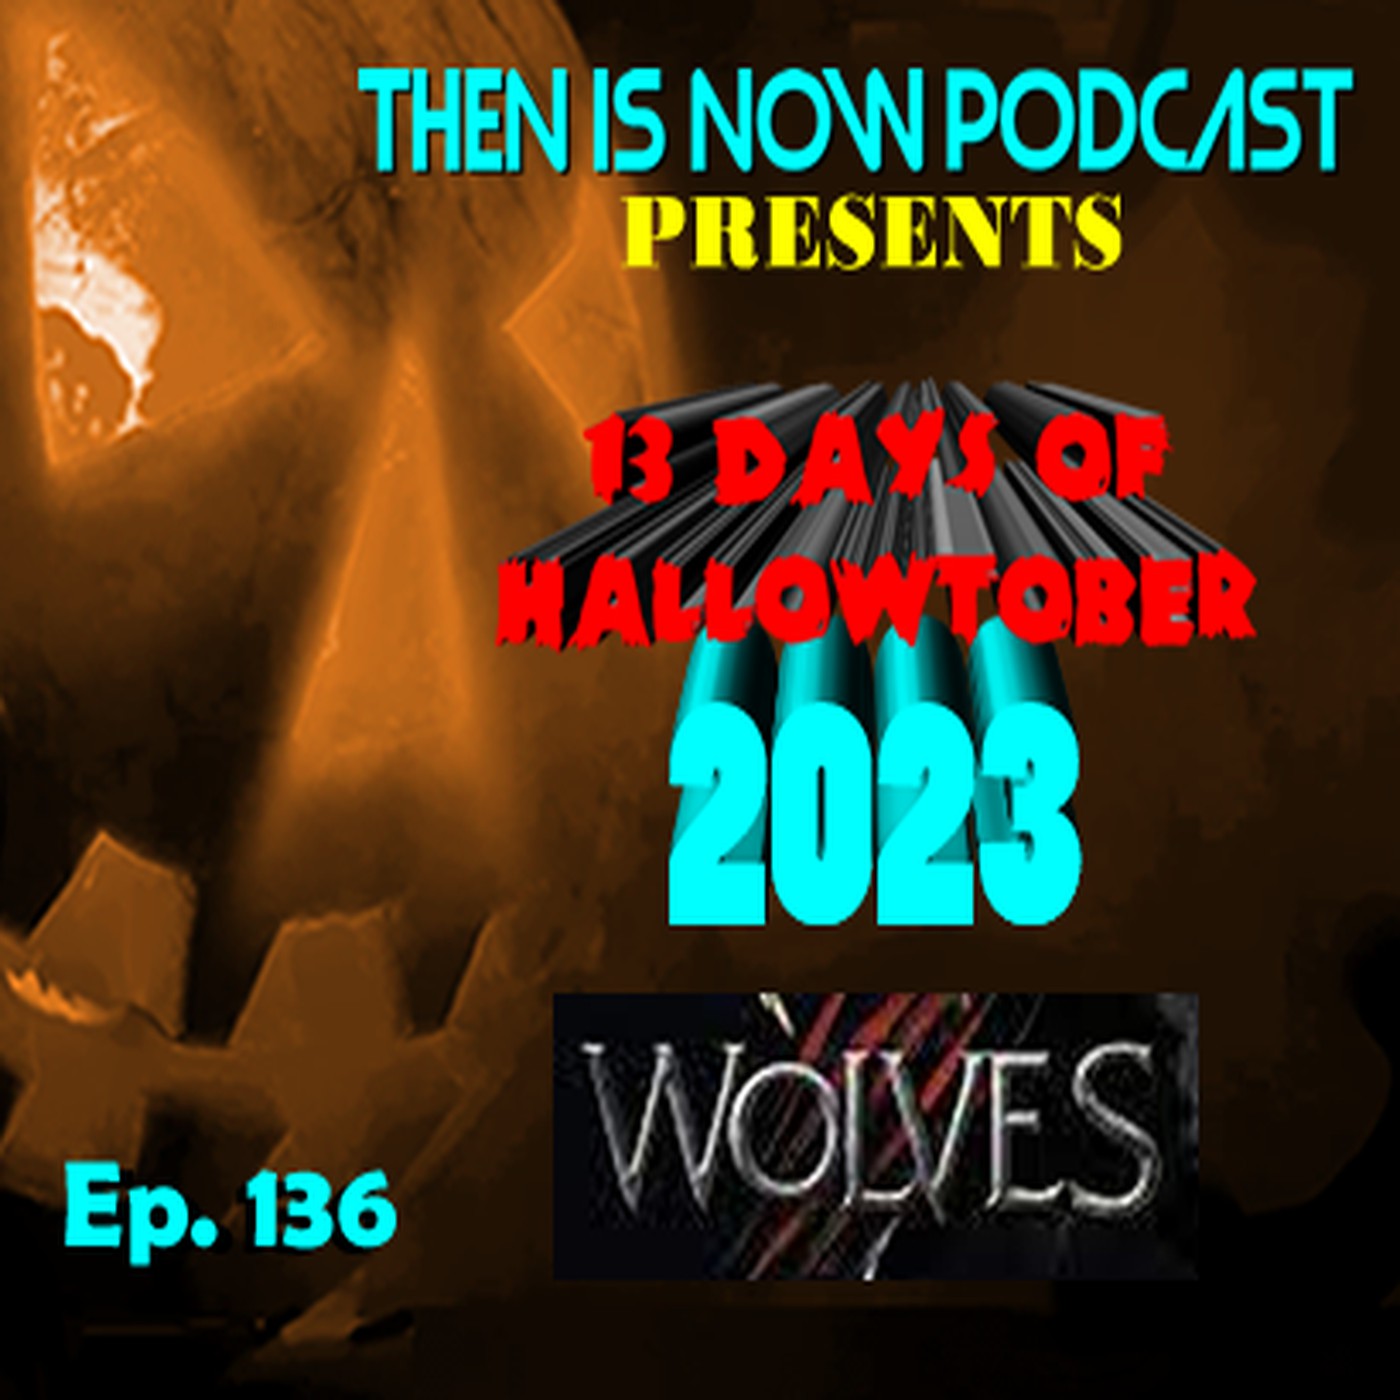 Then Is Now Ep. 136 - 13 Days of Hallowtober 2023 - Wolves (2014)